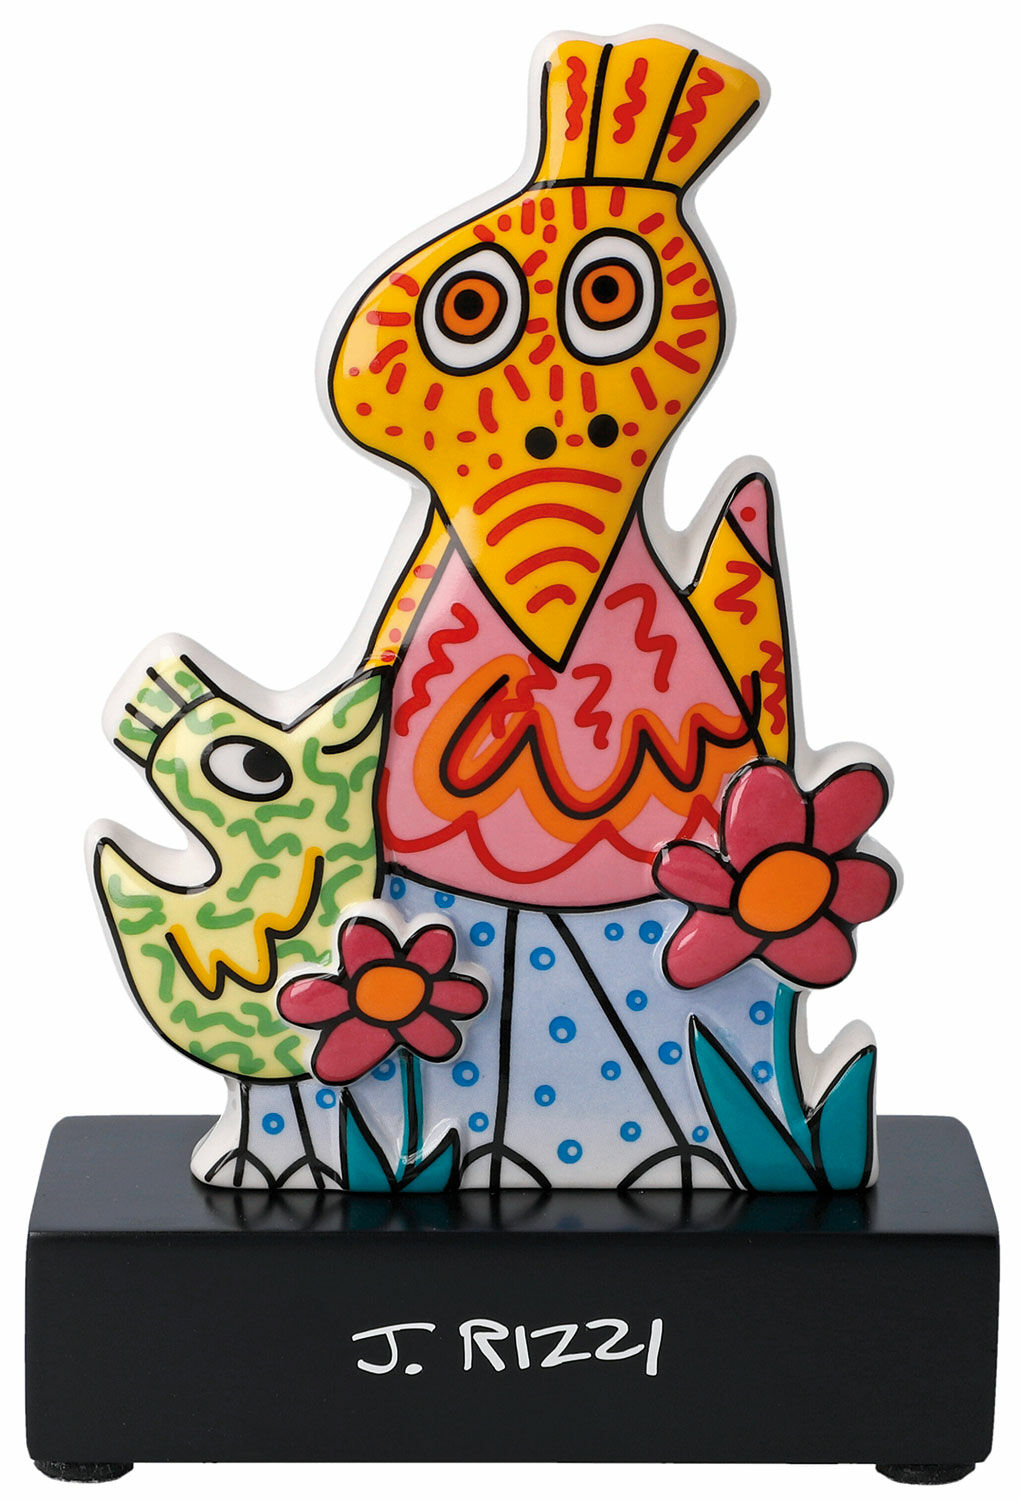 Porcelain Object "Mommy is the Best" by James Rizzi